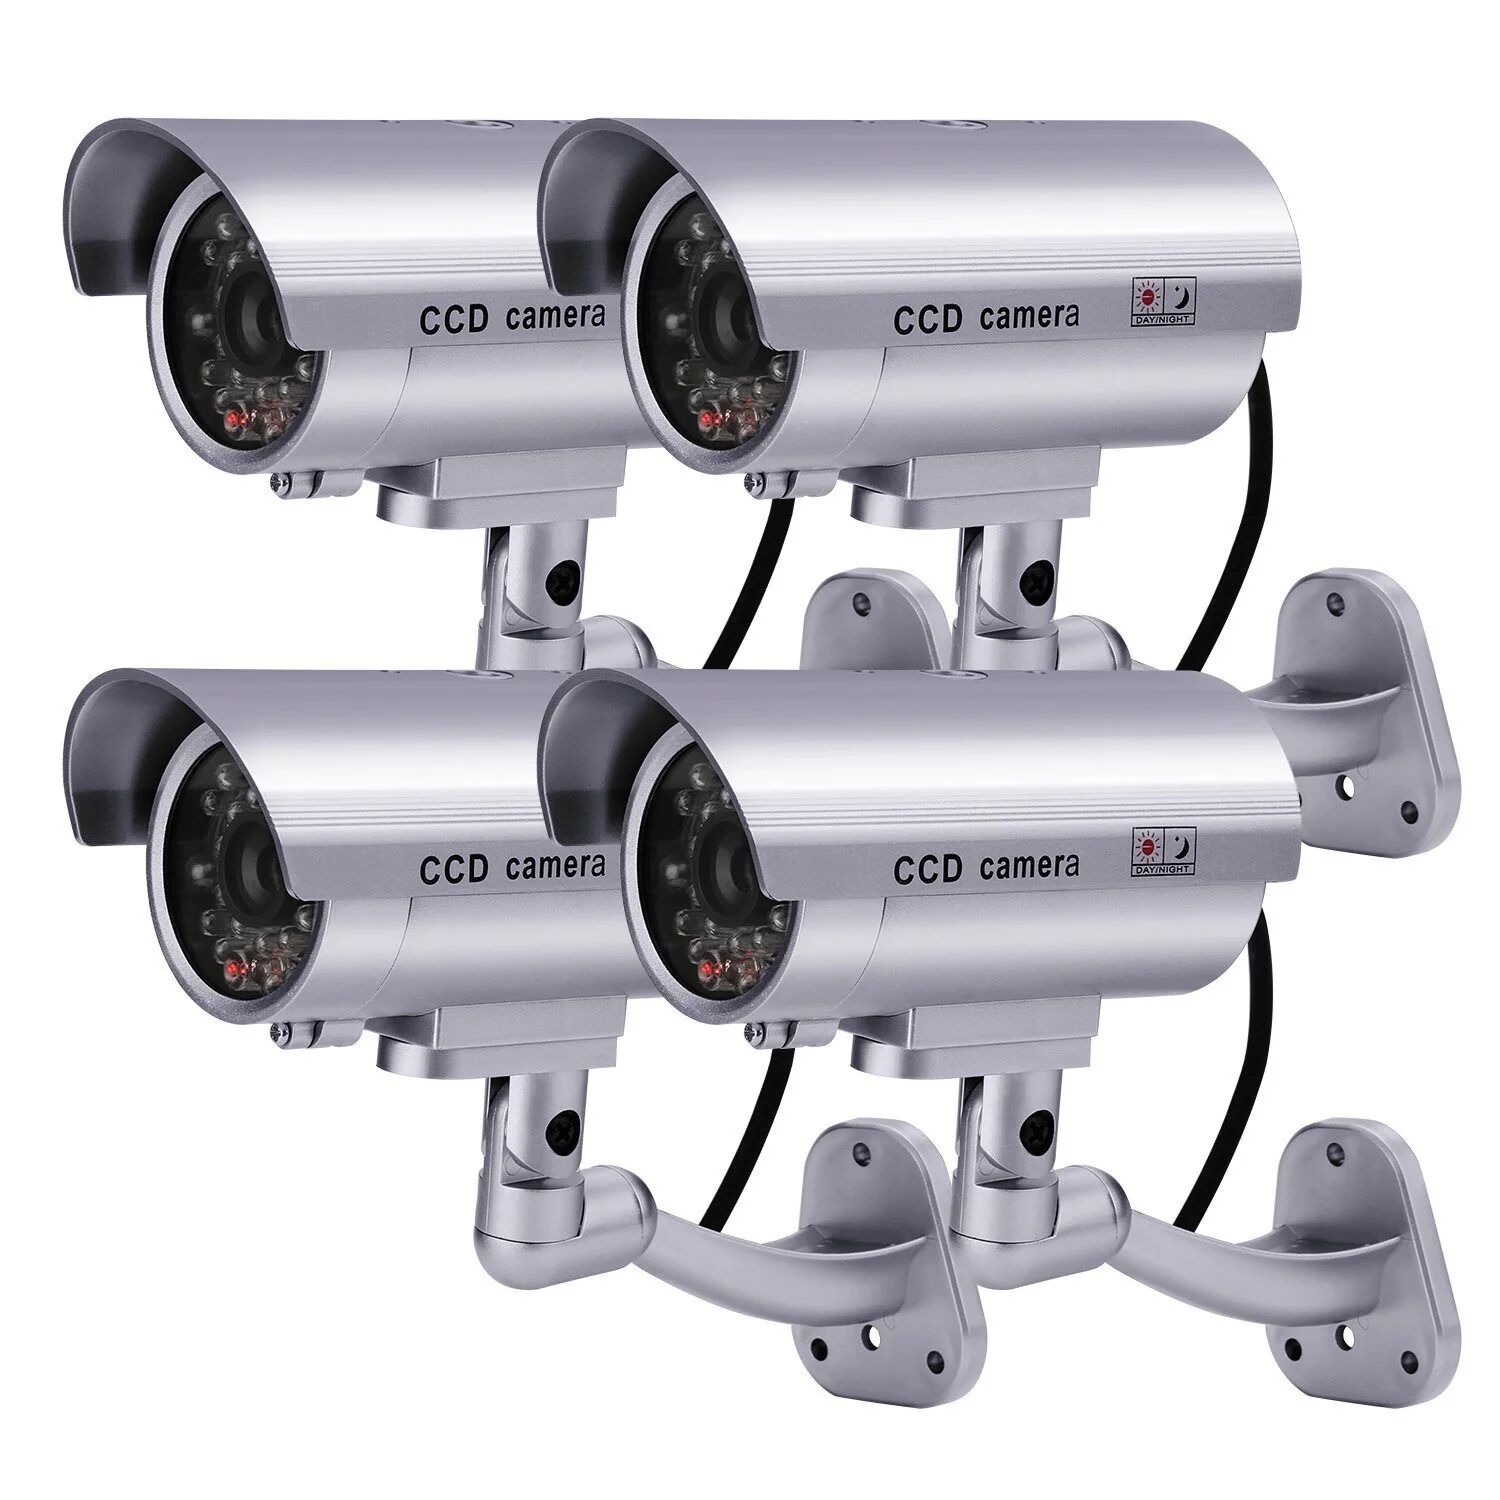 DailySale 4 Pack: Fitnate Fake Security Camera CCTV Surveillance System